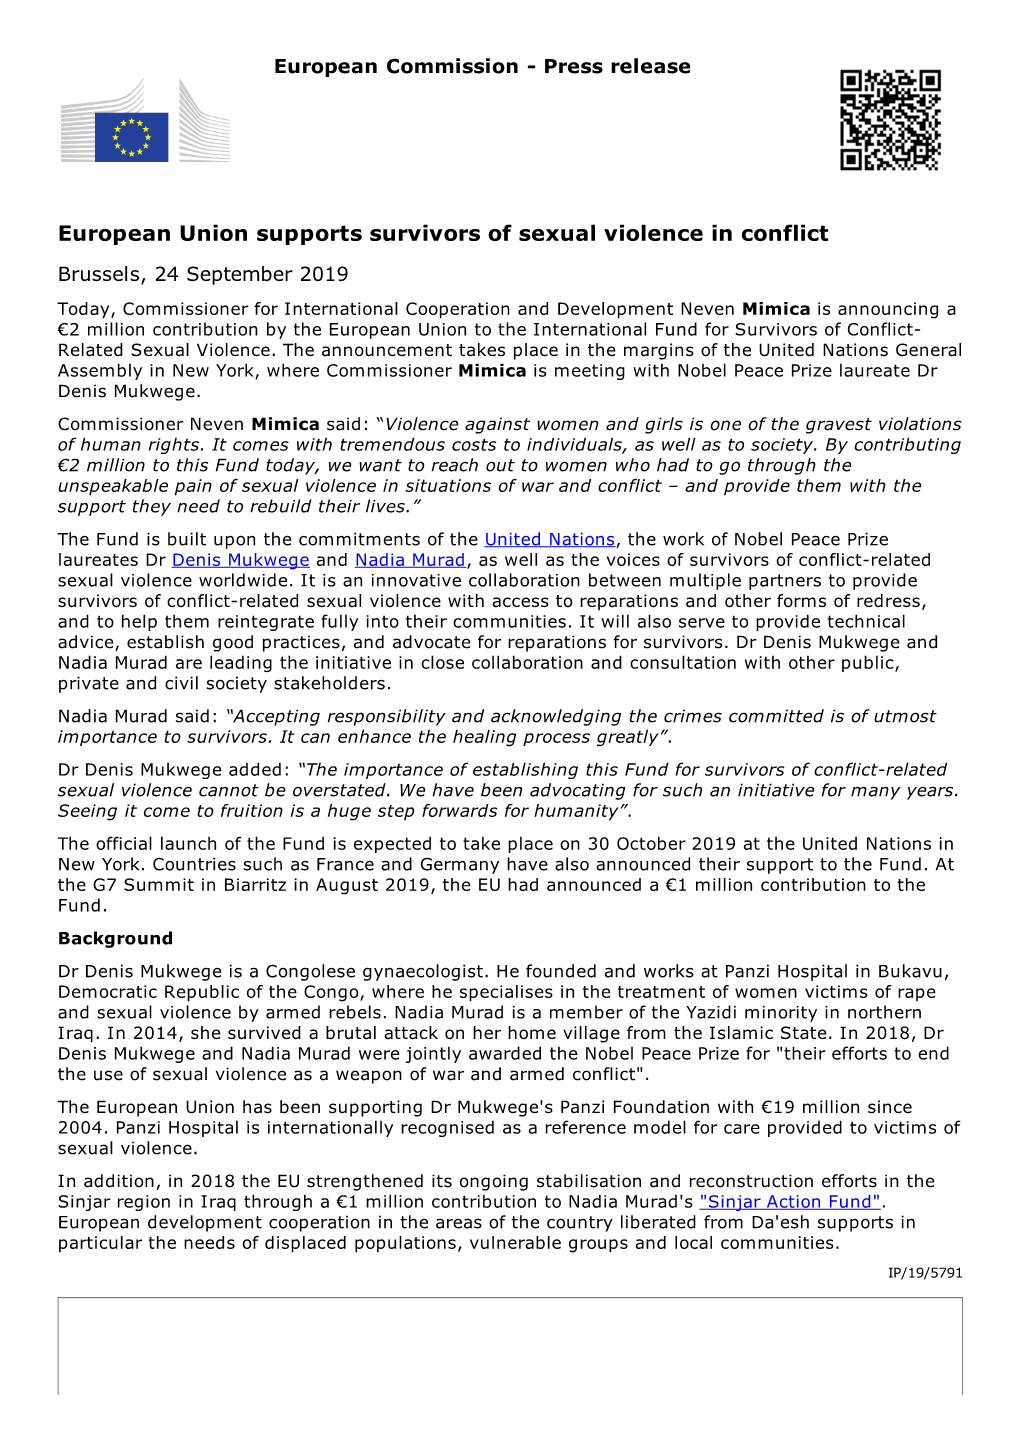 European Union Supports Survivors of Sexual Violence in Conflict